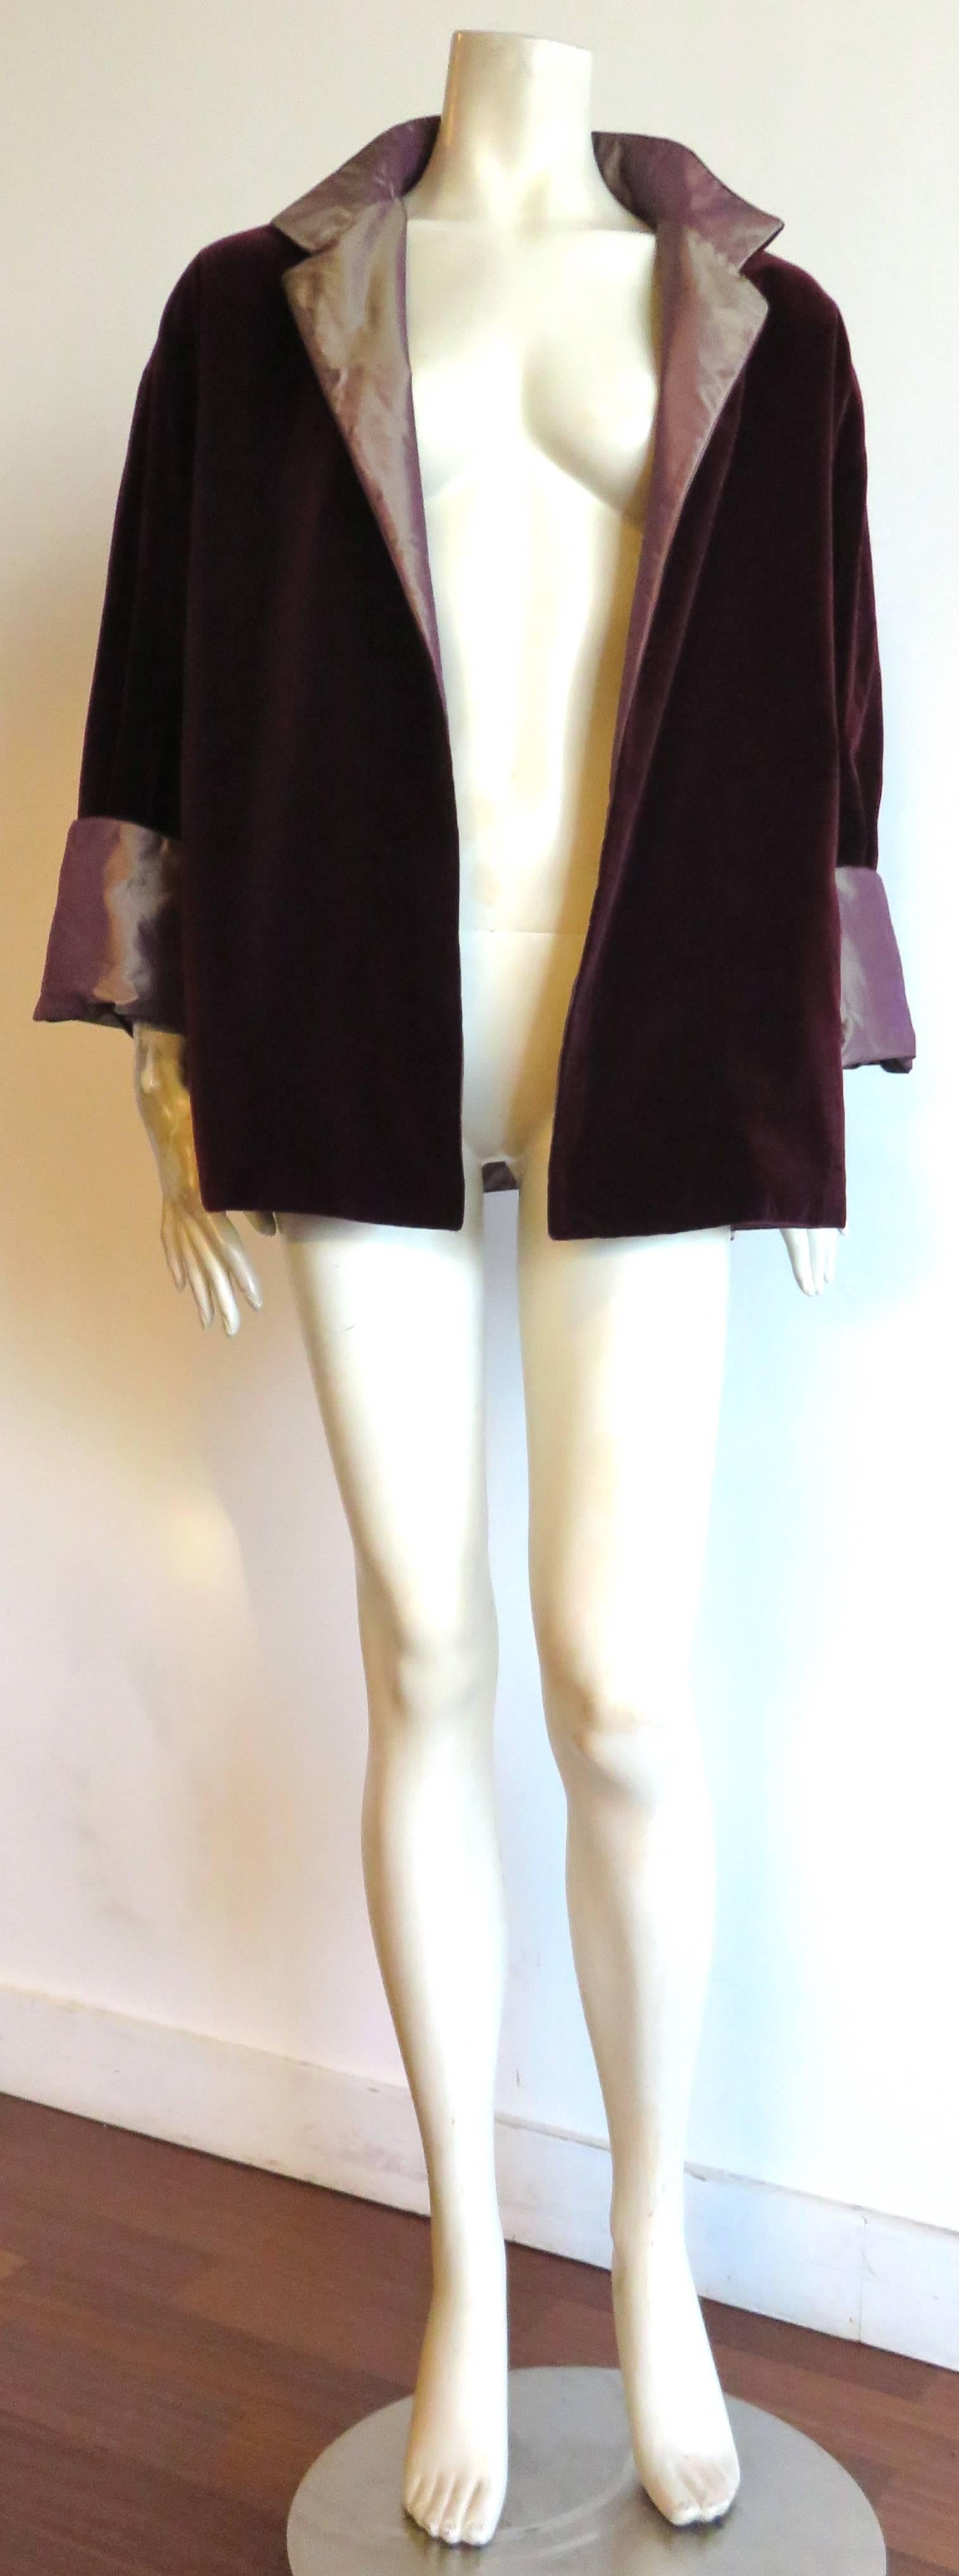 Excellent condition, 1990's ZORAN, reversible dark burgundy, velvet and tonic silk evening jacket.

Open-front, closure-less style, reversible jacket which can be worn on the velvet or taffeta side.

Plush velvet fabrication with no damages, or